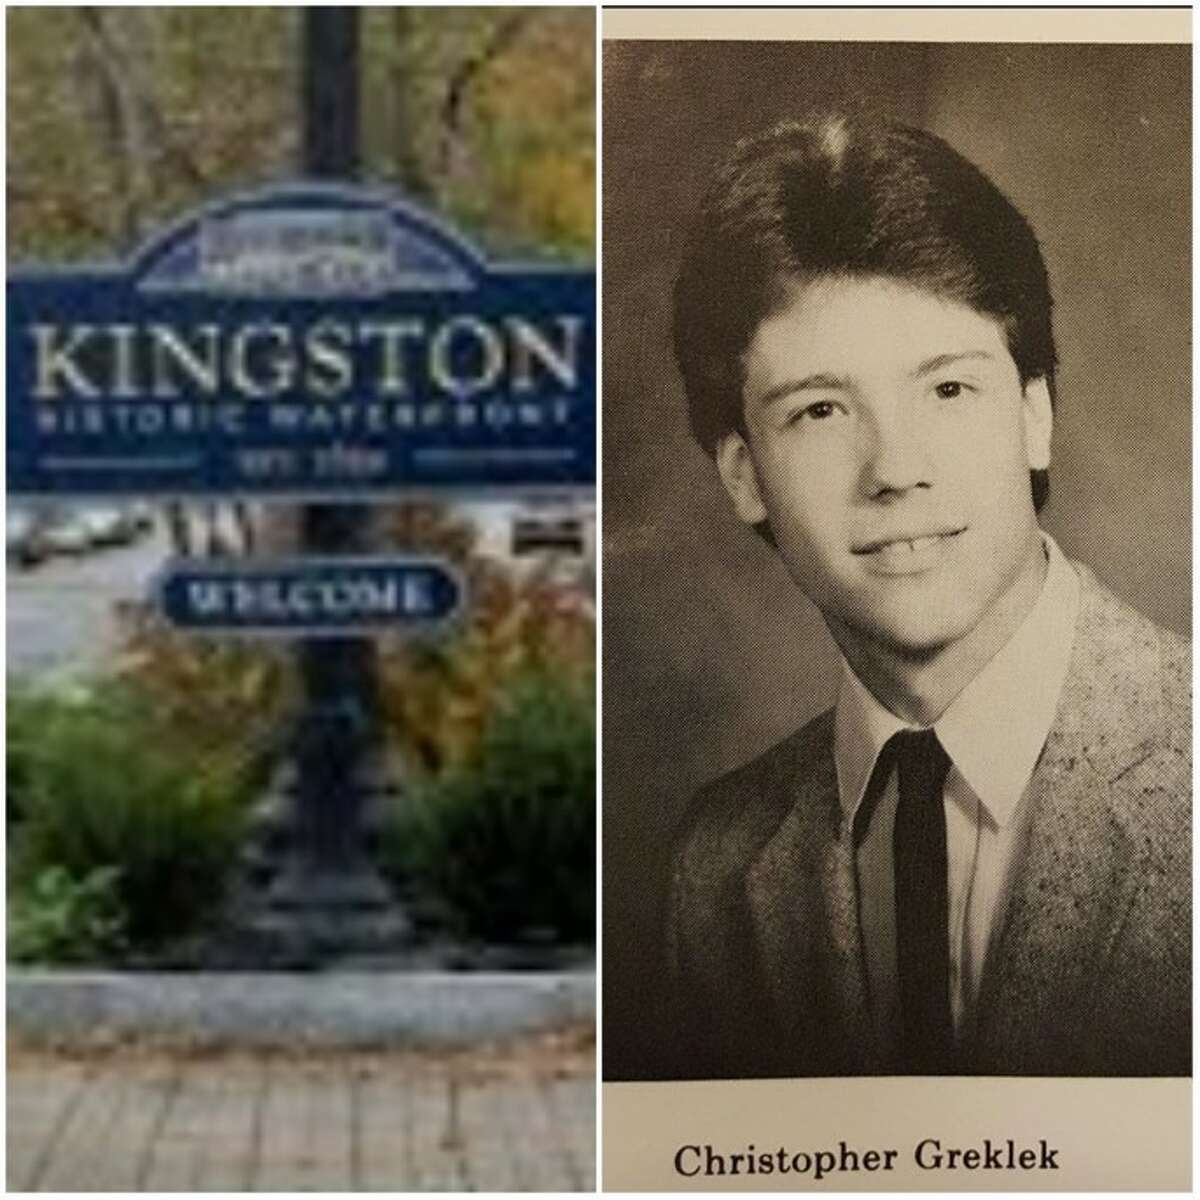 2. I was born in Kingston and graduated from Kingston High School in 1986.